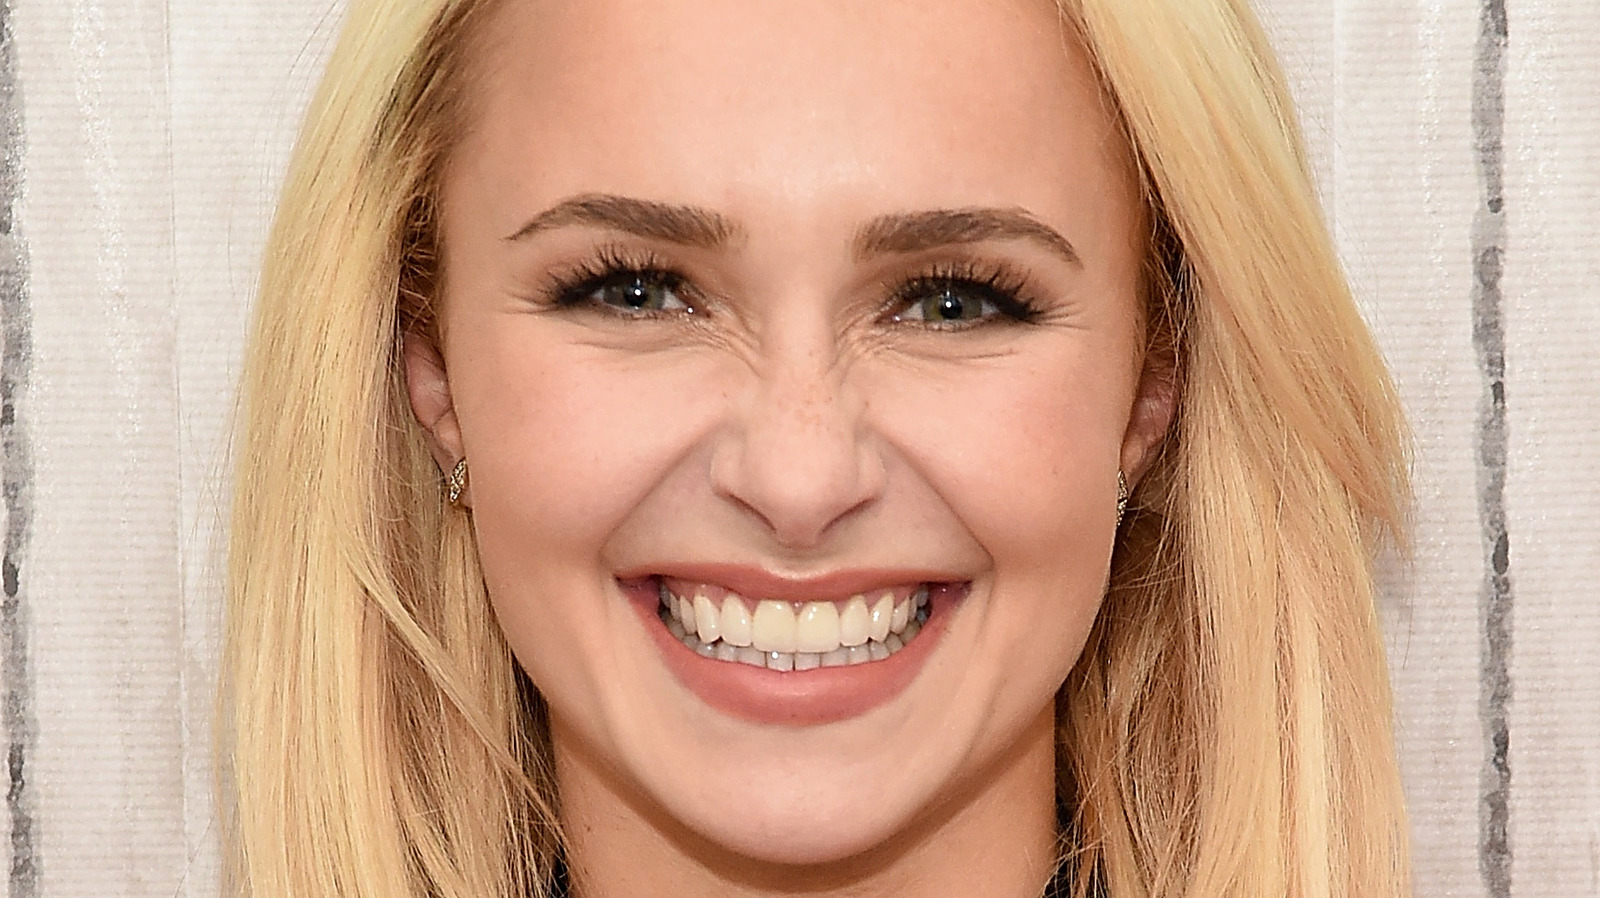 Who Hayden Panettiere Was Just Spotted With - Nicki Swift.